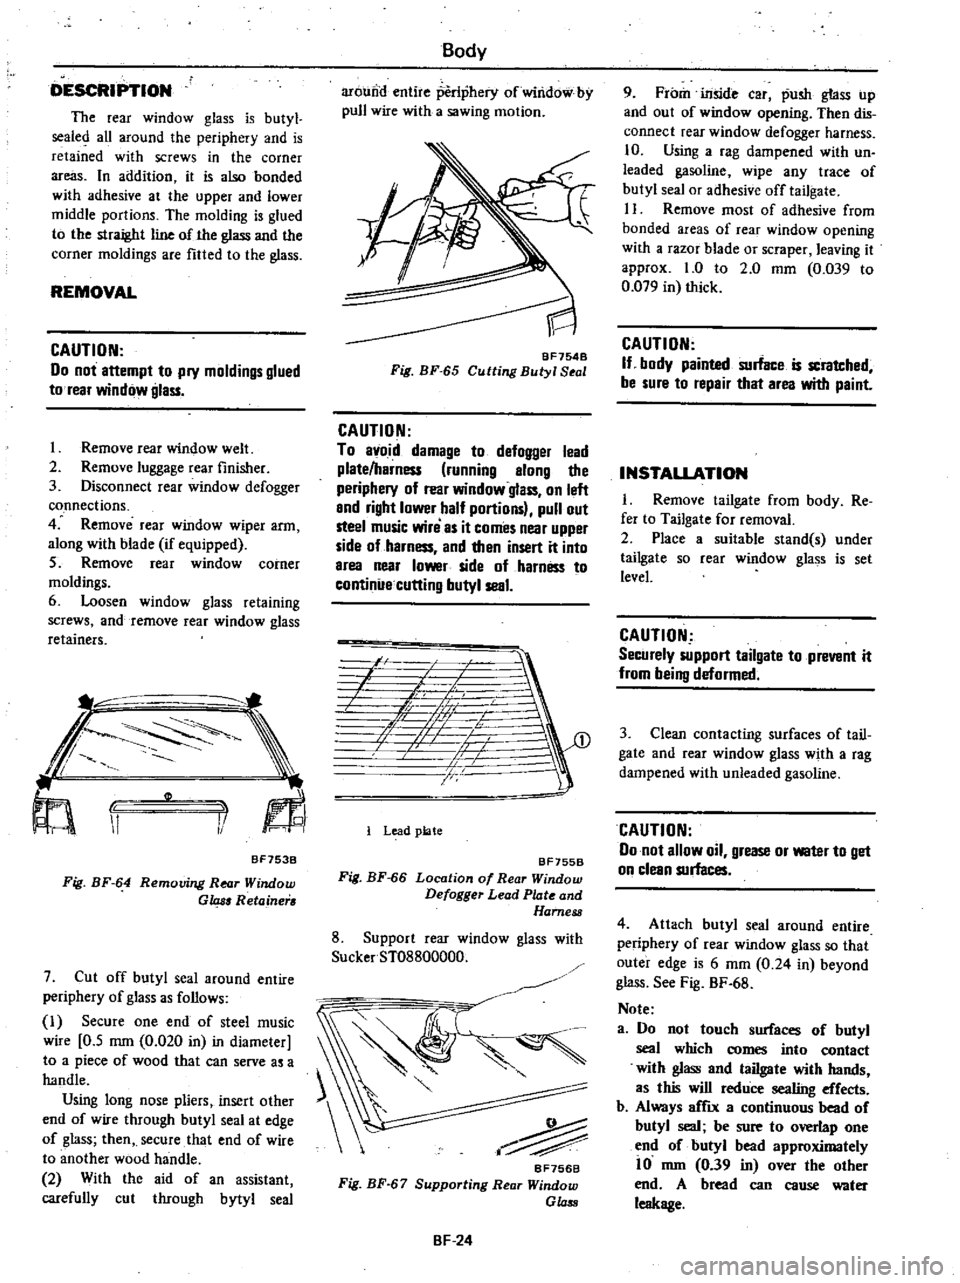 DATSUN 210 1979  Service Manual 
DESCRIPTION

The 
rear

window

glass 
is

butyl

sealed 
aU 
around 
the

periphery 
and 
is

retained 
with

screws 
in 
the

corner

areas 
In 
addition 
it 
is 
also

bonded

with 
adhesive 
at 
